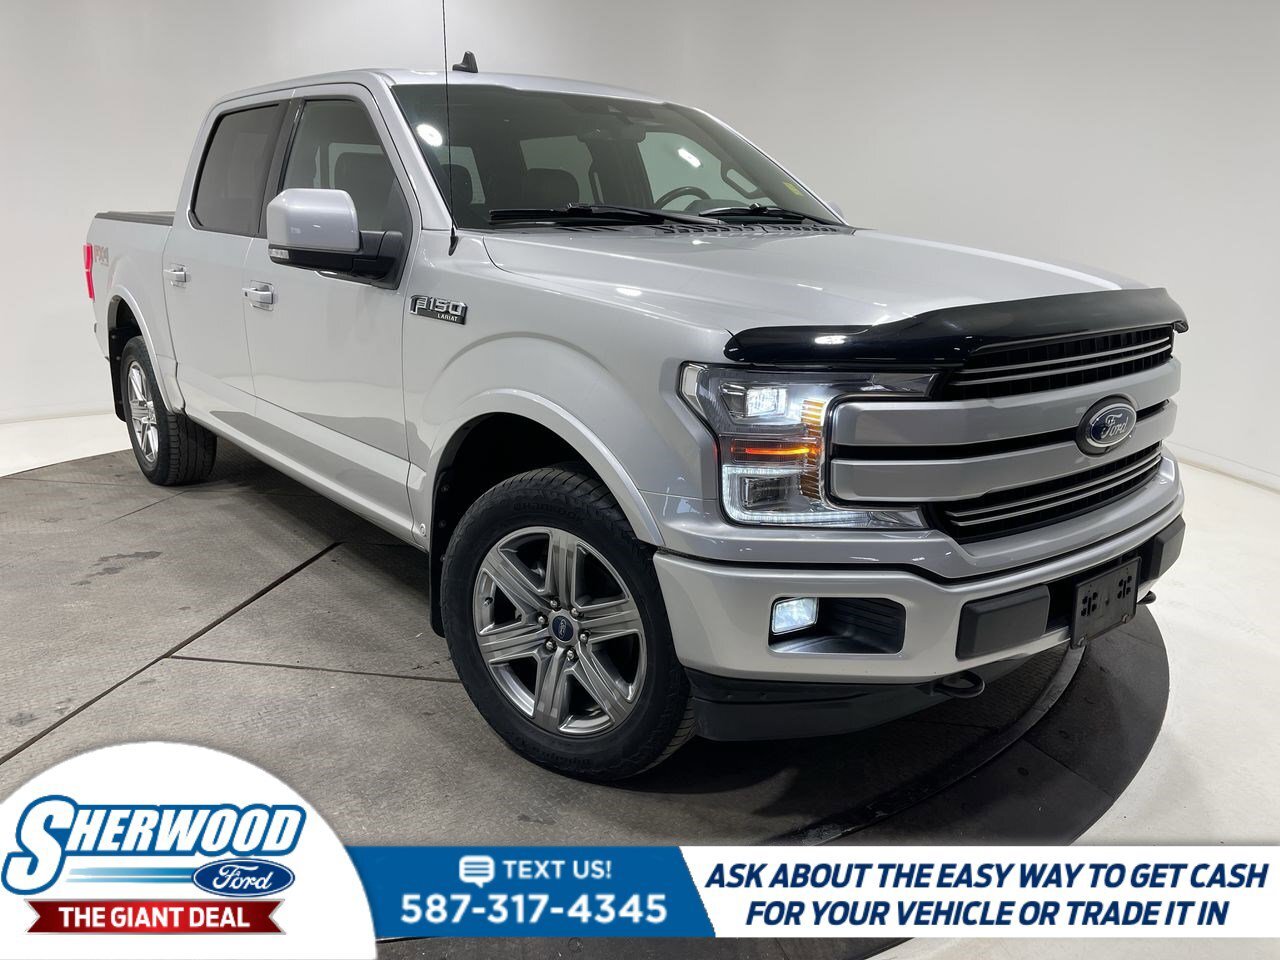 2019 Ford F-150 Lariat $0 Down $169 Weekly NEW TIRES/REAR BRAKES